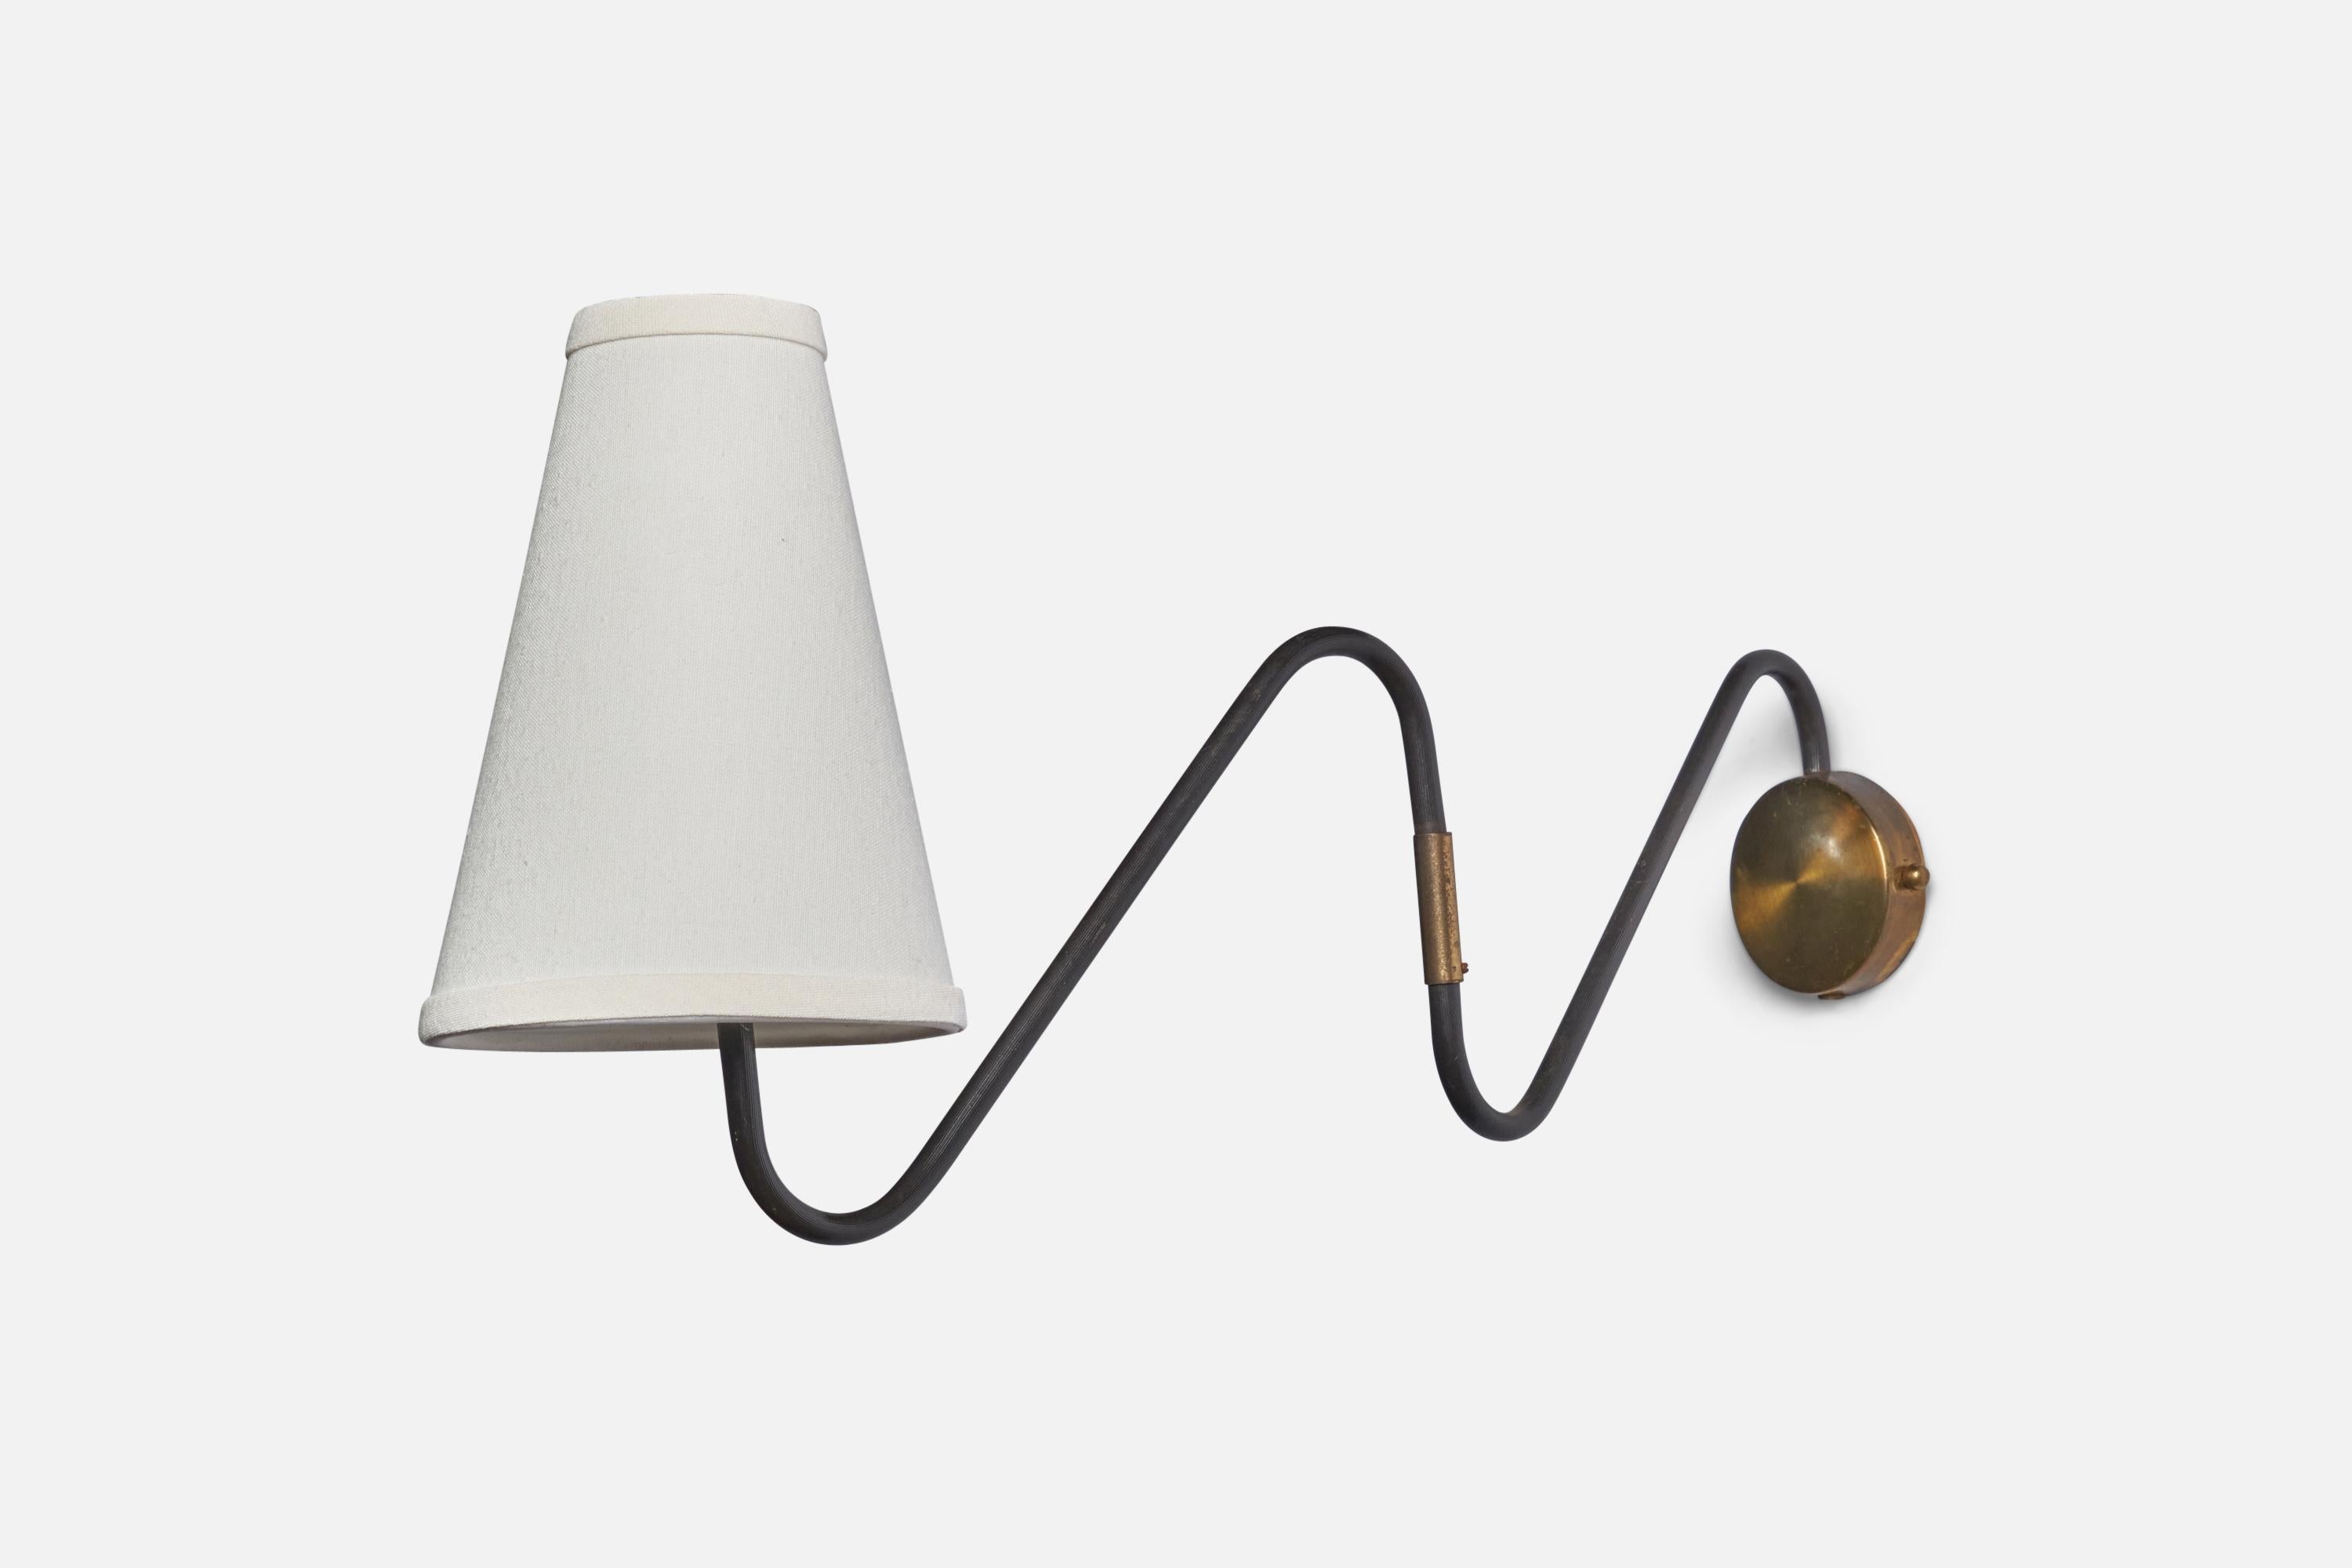 An adjustable black-lacquered metal, brass and white fabric wall light, designed and produced in Denmark, 1940s.

Fully Expanded Dimensions (inches): 12.25